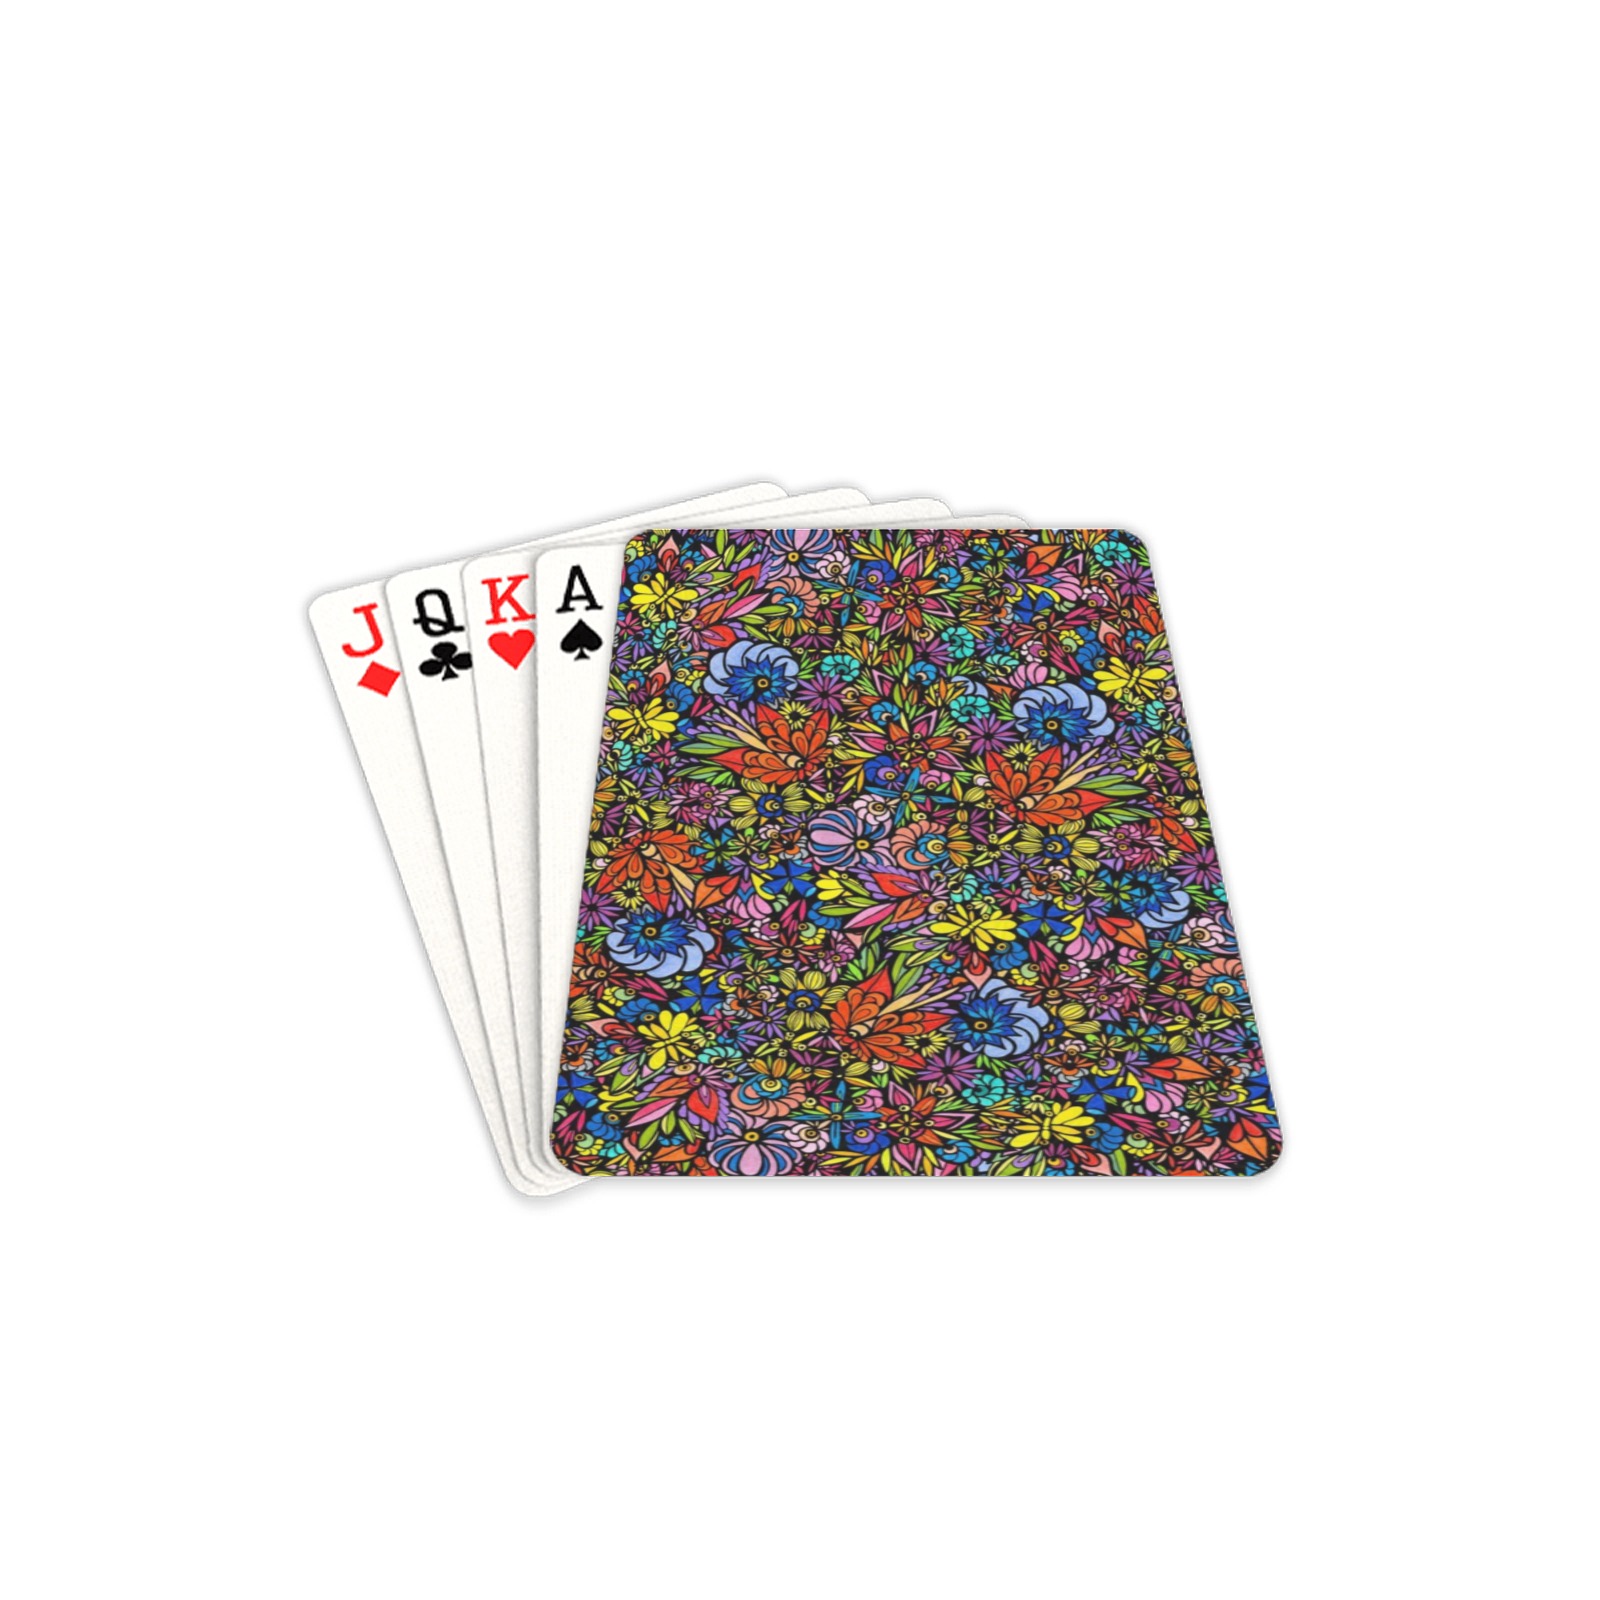 Lac La Hache Wildflowers Playing Cards 2.5"x3.5"